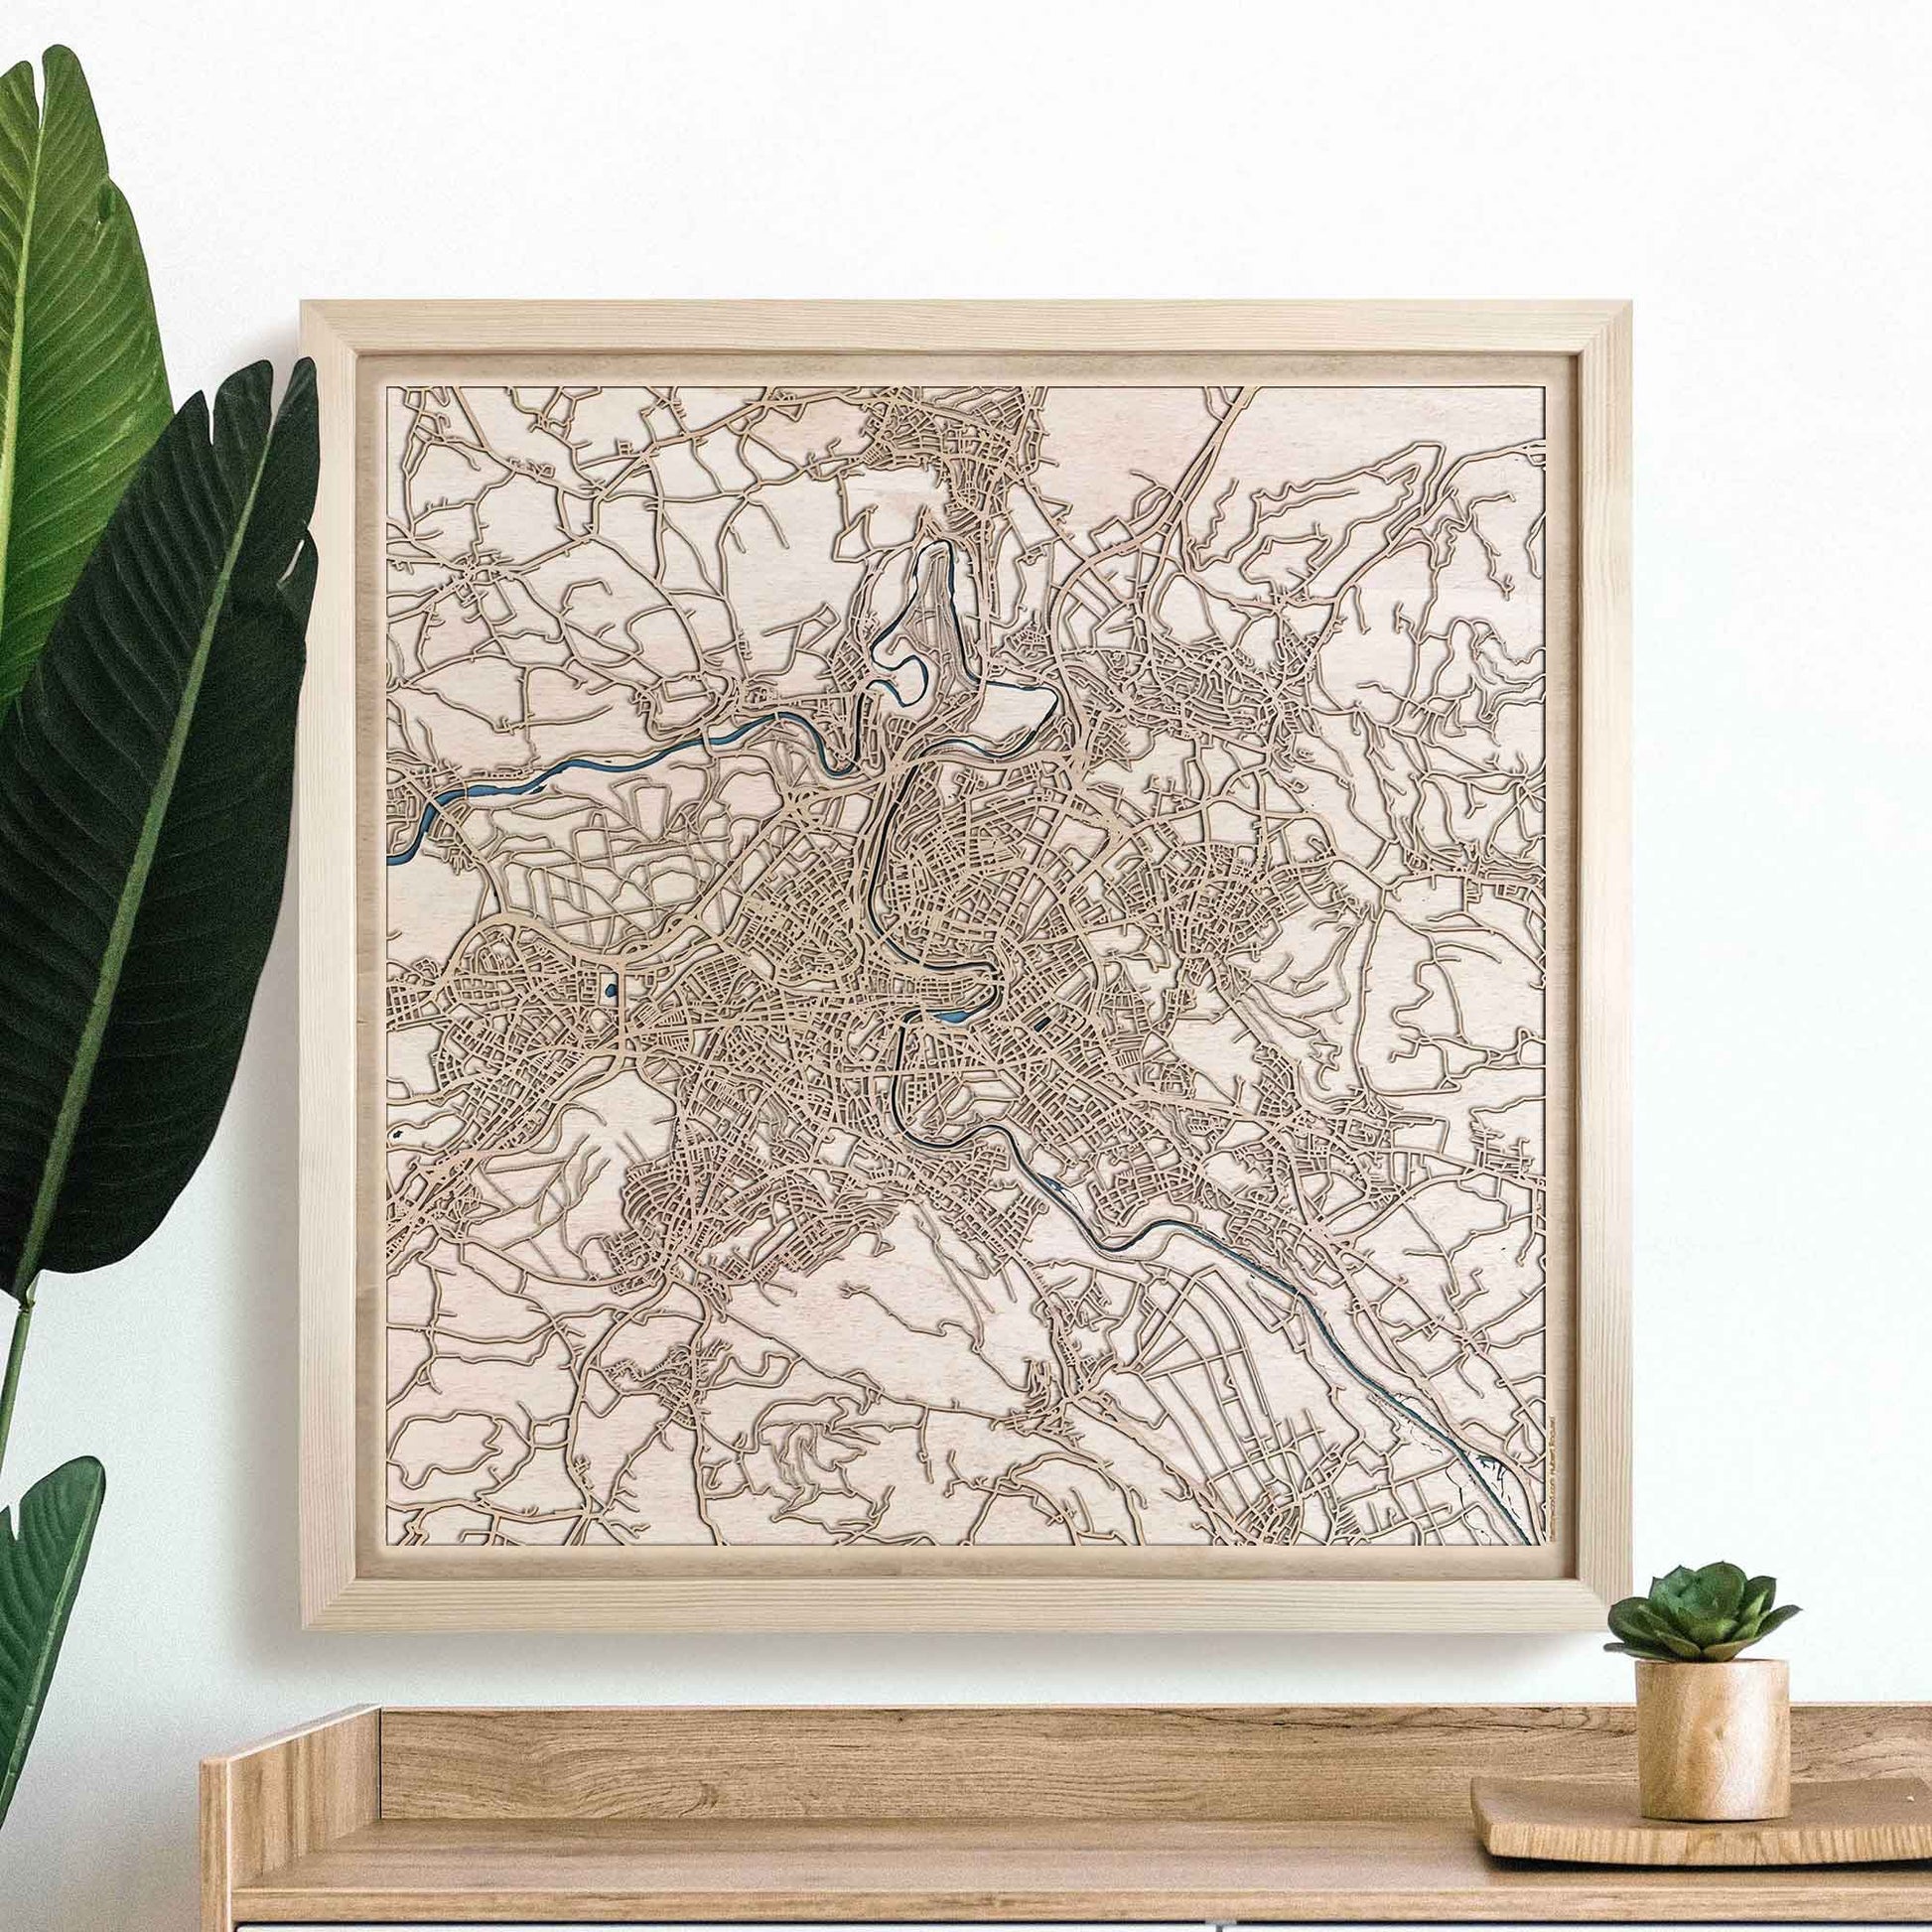 Bern Wooden Map by CityWood - Custom Wood Map Art - Unique Laser Cut Engraved - Anniversary Gift